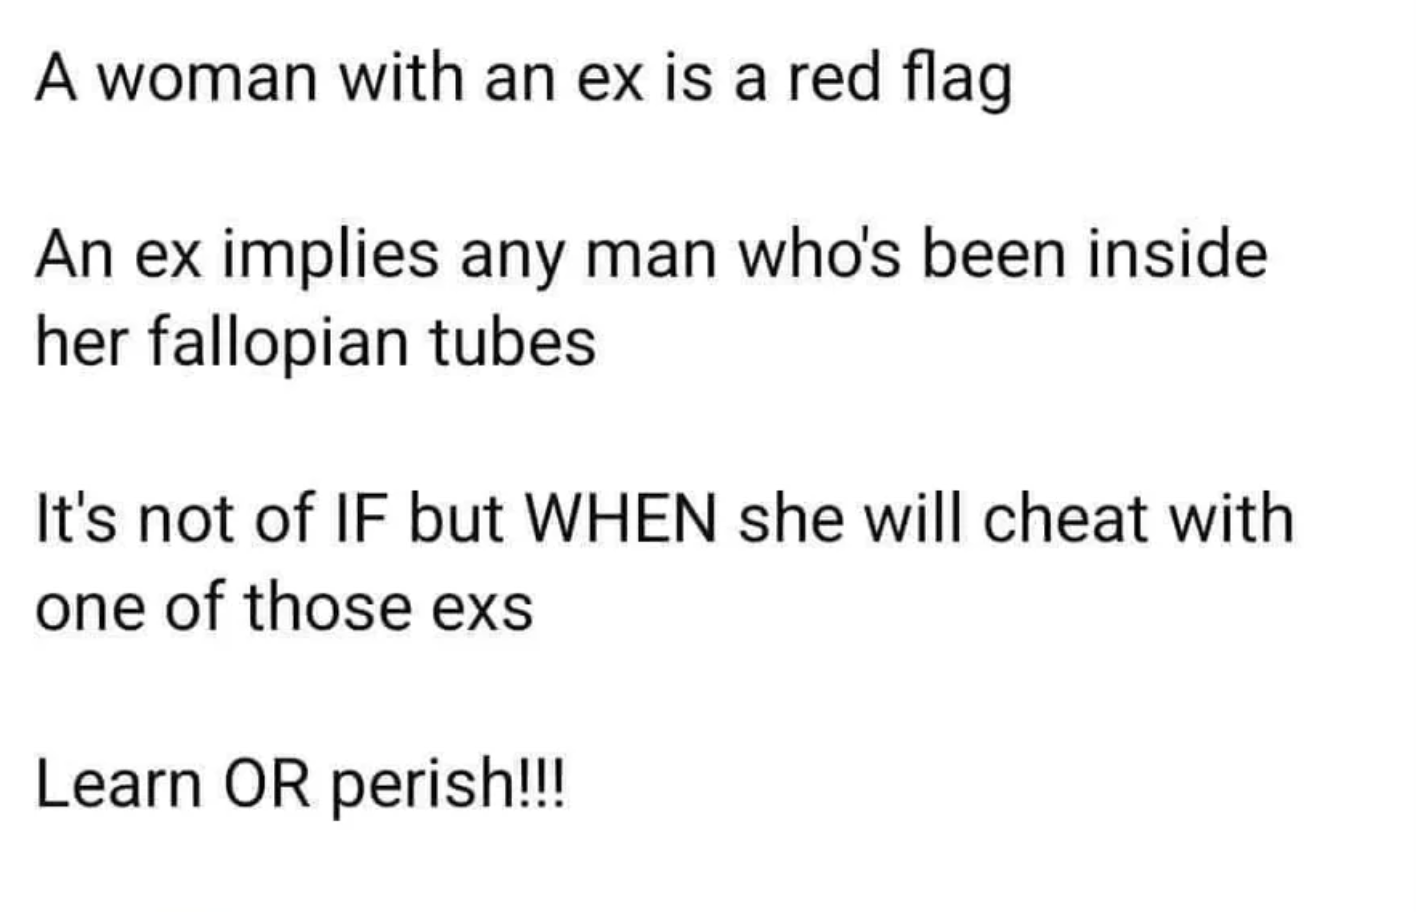 &quot;A woman with an ex is a red flag / An ex implies any man who&#x27;s been inside her fallopian tubes / It&#x27;s not an IF but WHEN she will cheat with one of those exes&quot;